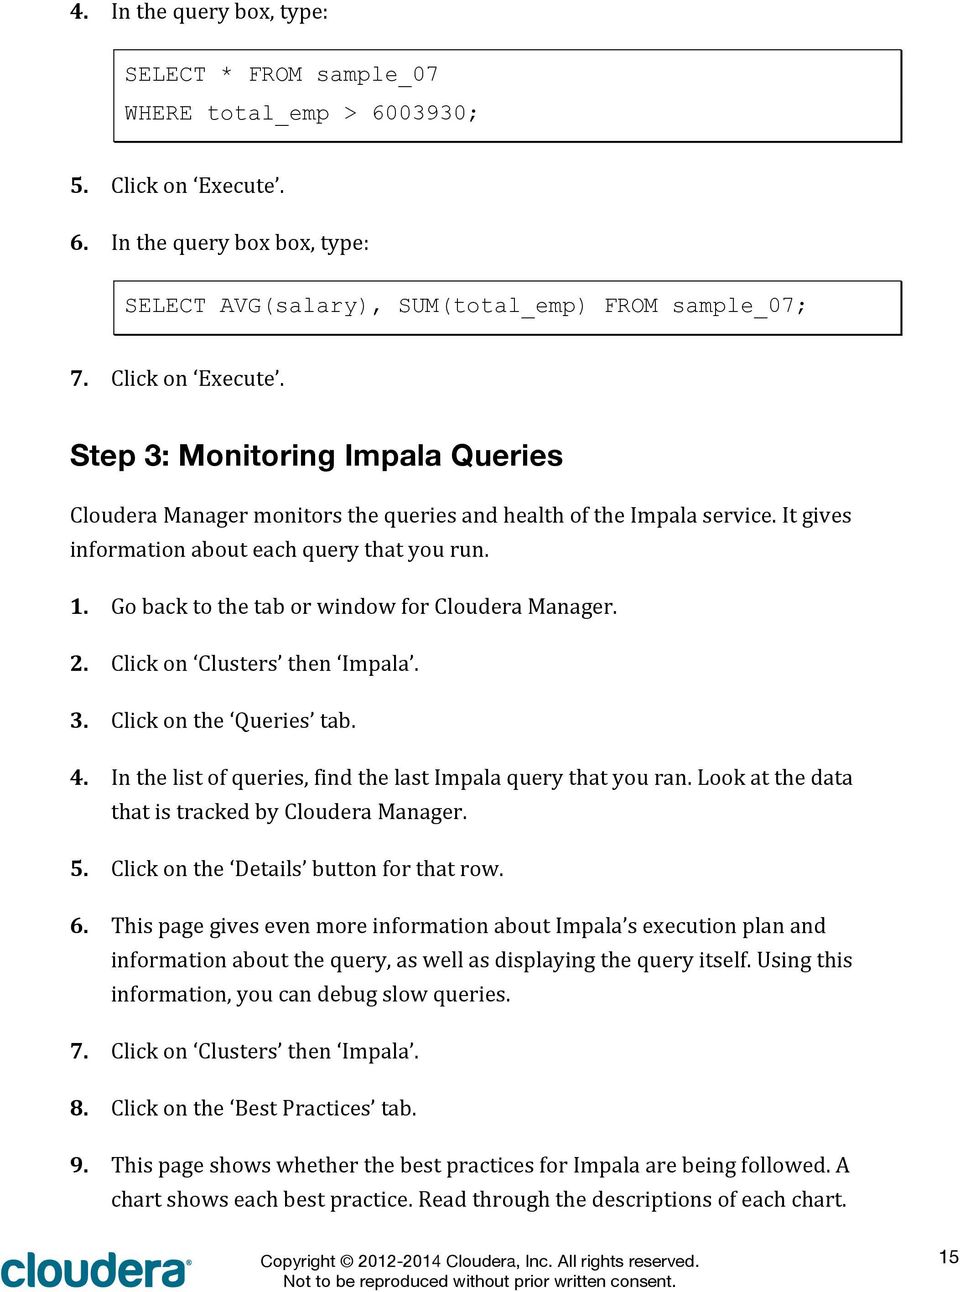 Go back to the tab or window for Cloudera Manager. 2. Click on Clusters then Impala. 3. Click on the Queries tab. 4. In the list of queries, find the last Impala query that you ran.